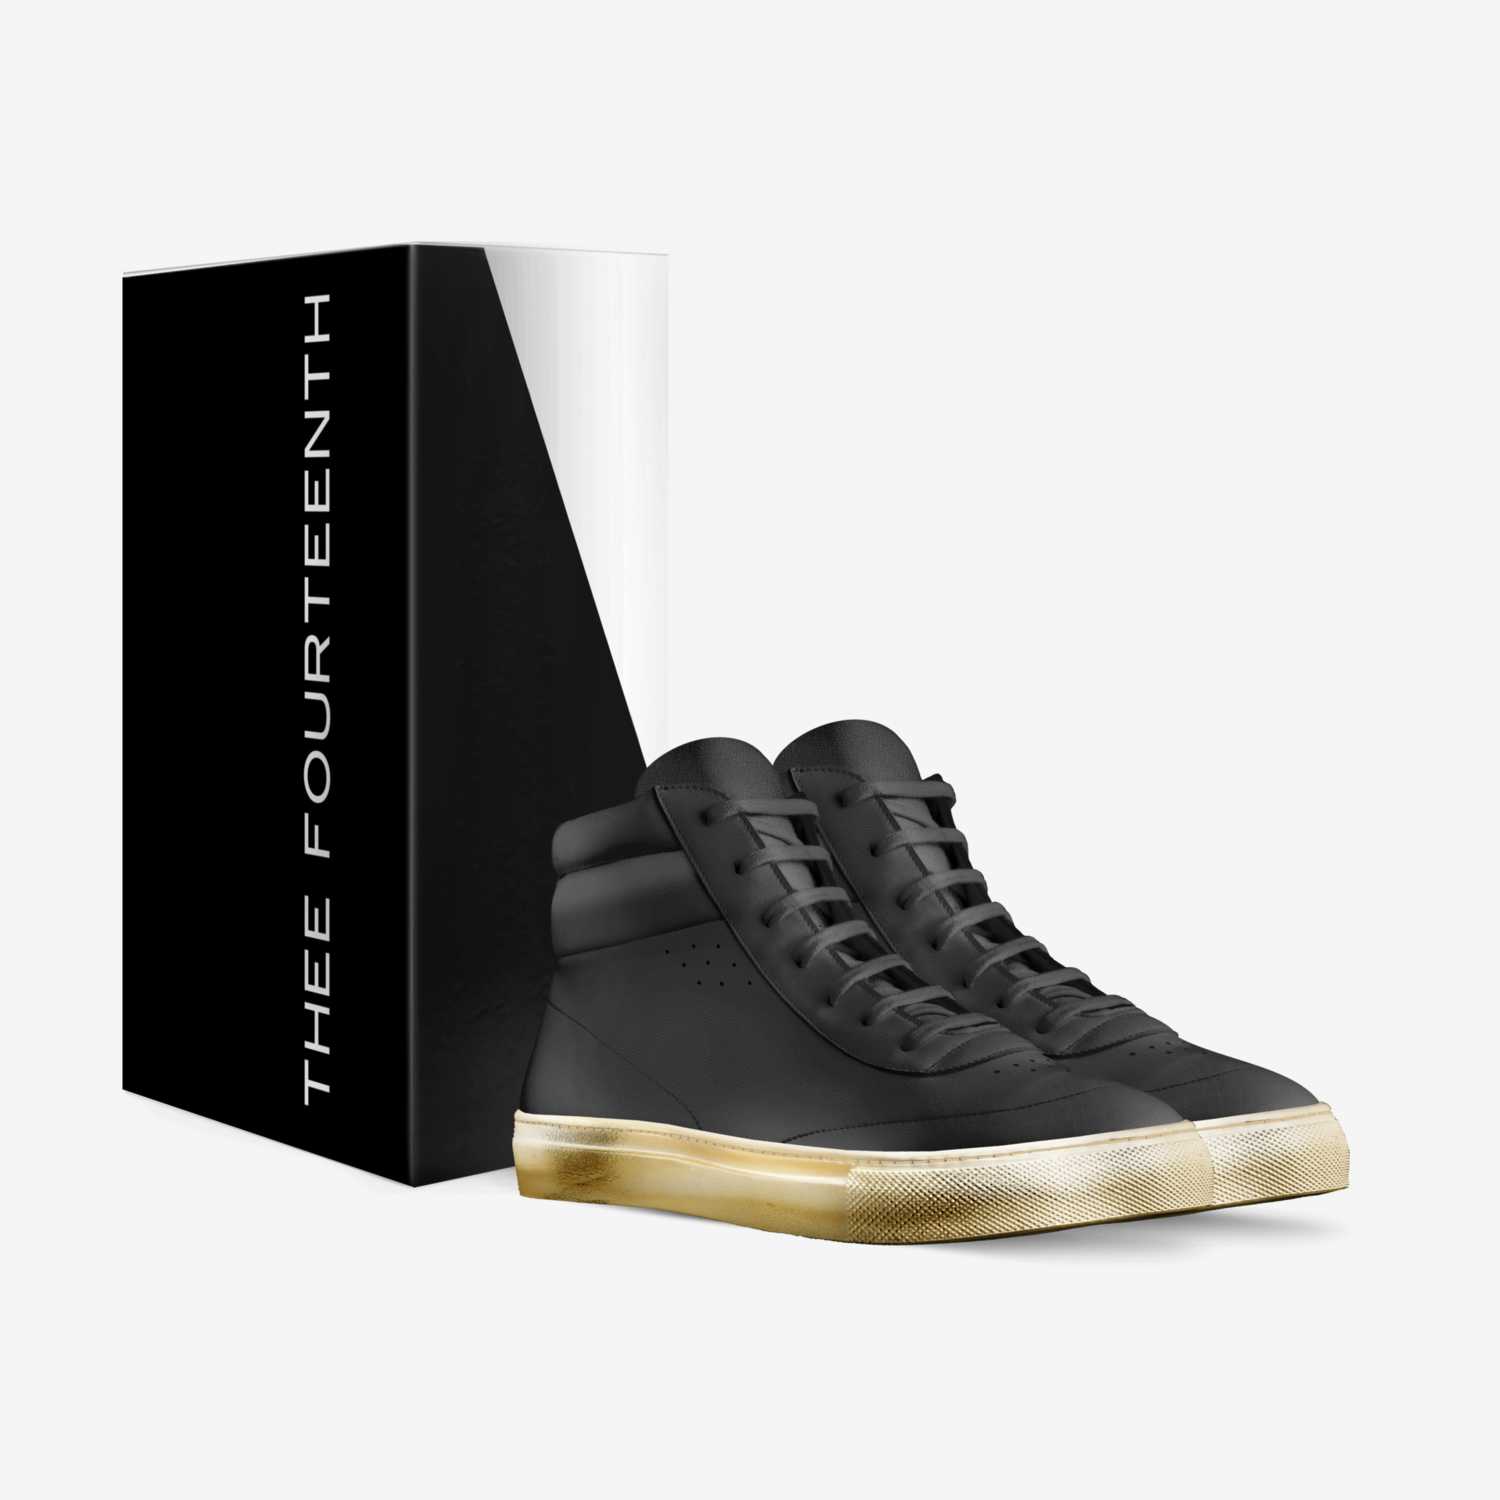 14 BLVCK AND GXLD custom made in Italy shoes by J.ransom Futrell | Box view